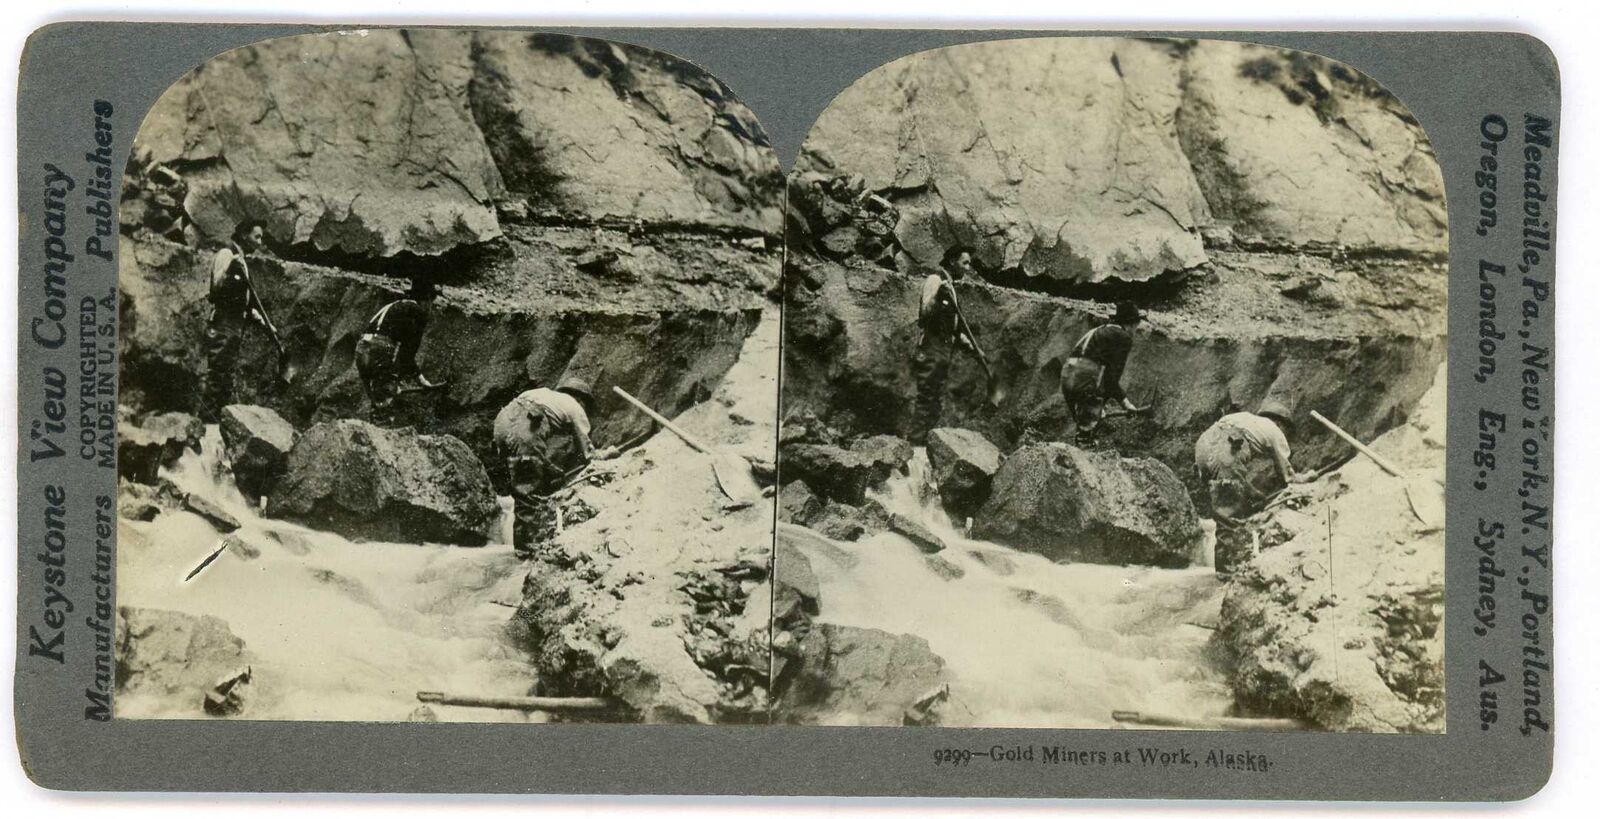 Alaska Gold Rush GOLD MINERS DIGGING GOLD IN BANK OF SOIL Stereoview 9299 kak12